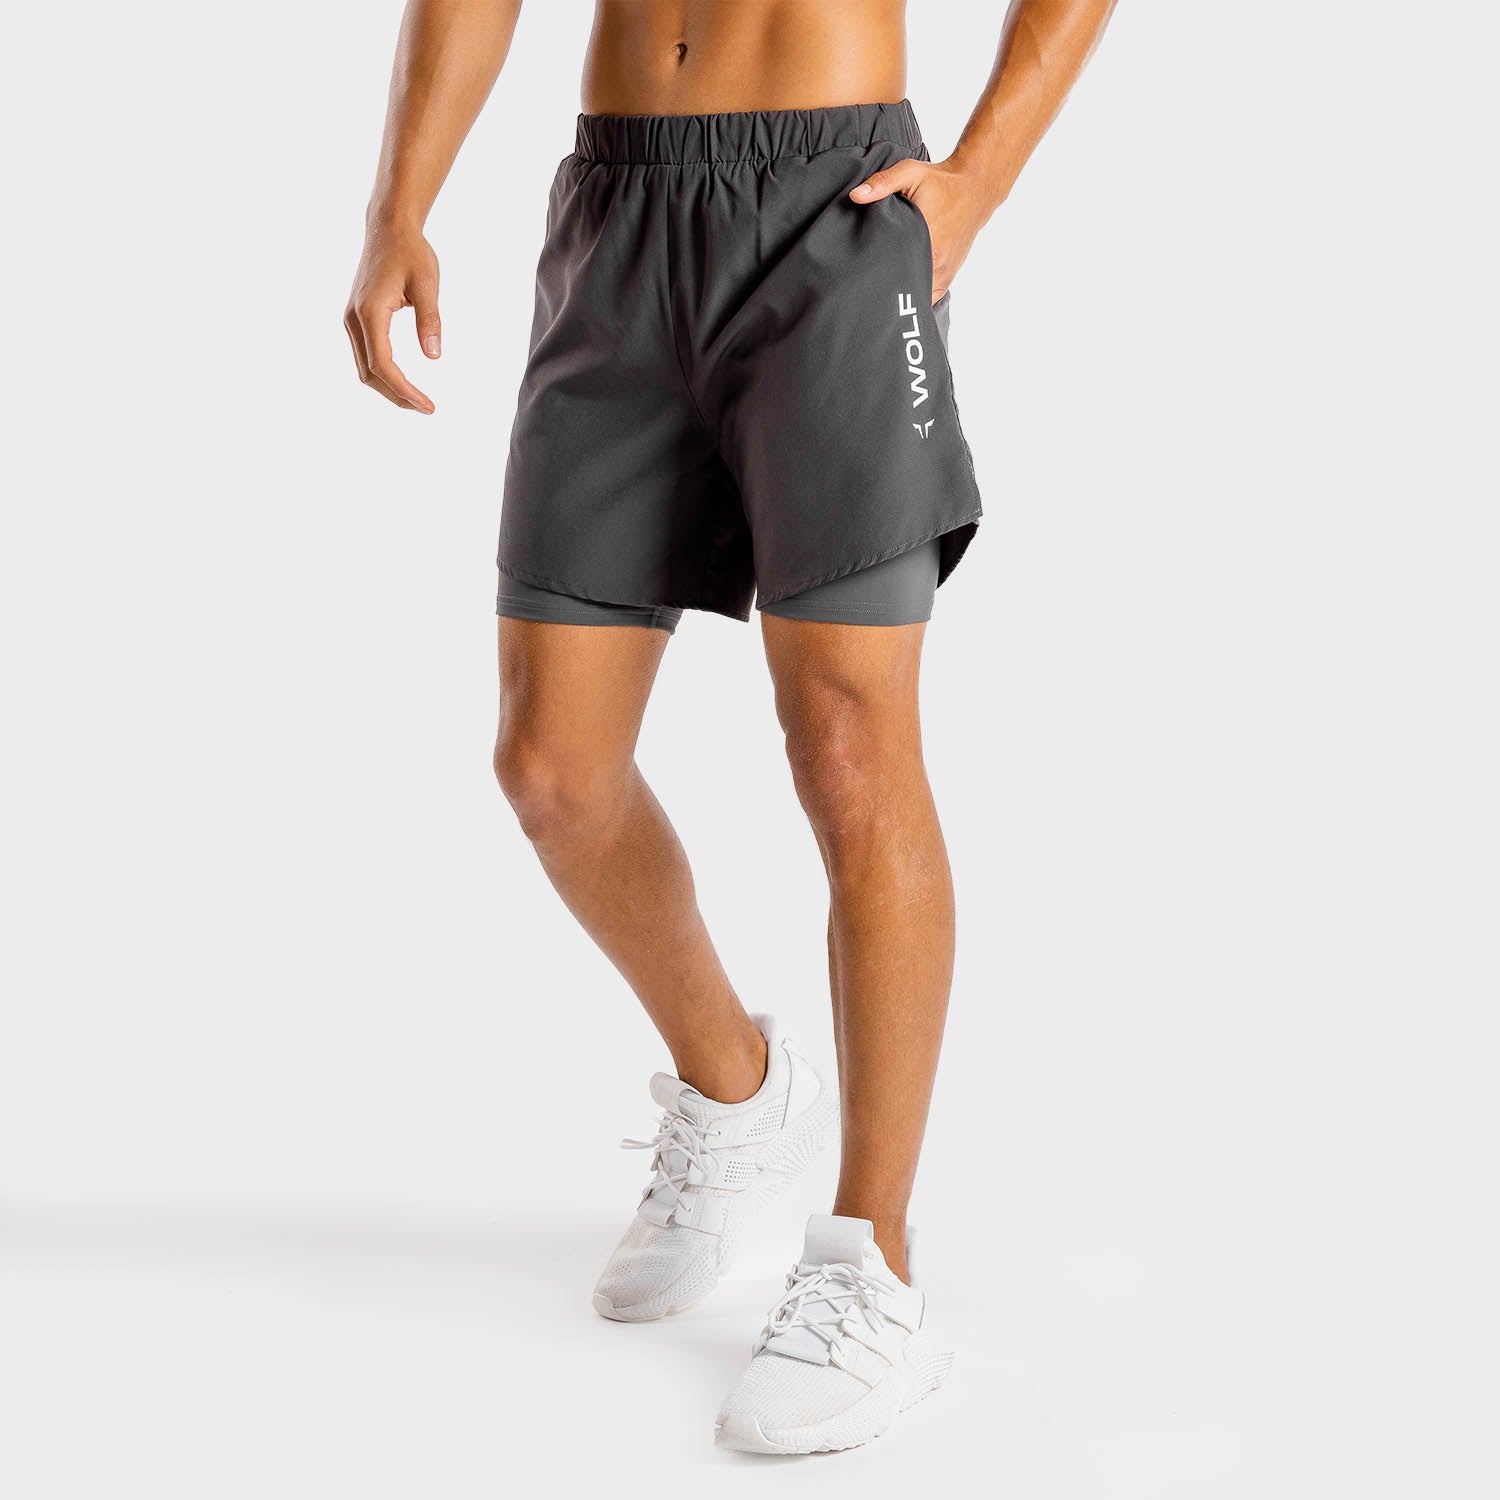 squatwolf-gym-wear-primal-shorts-2-in-1-charcoal-workout-shorts-for-men